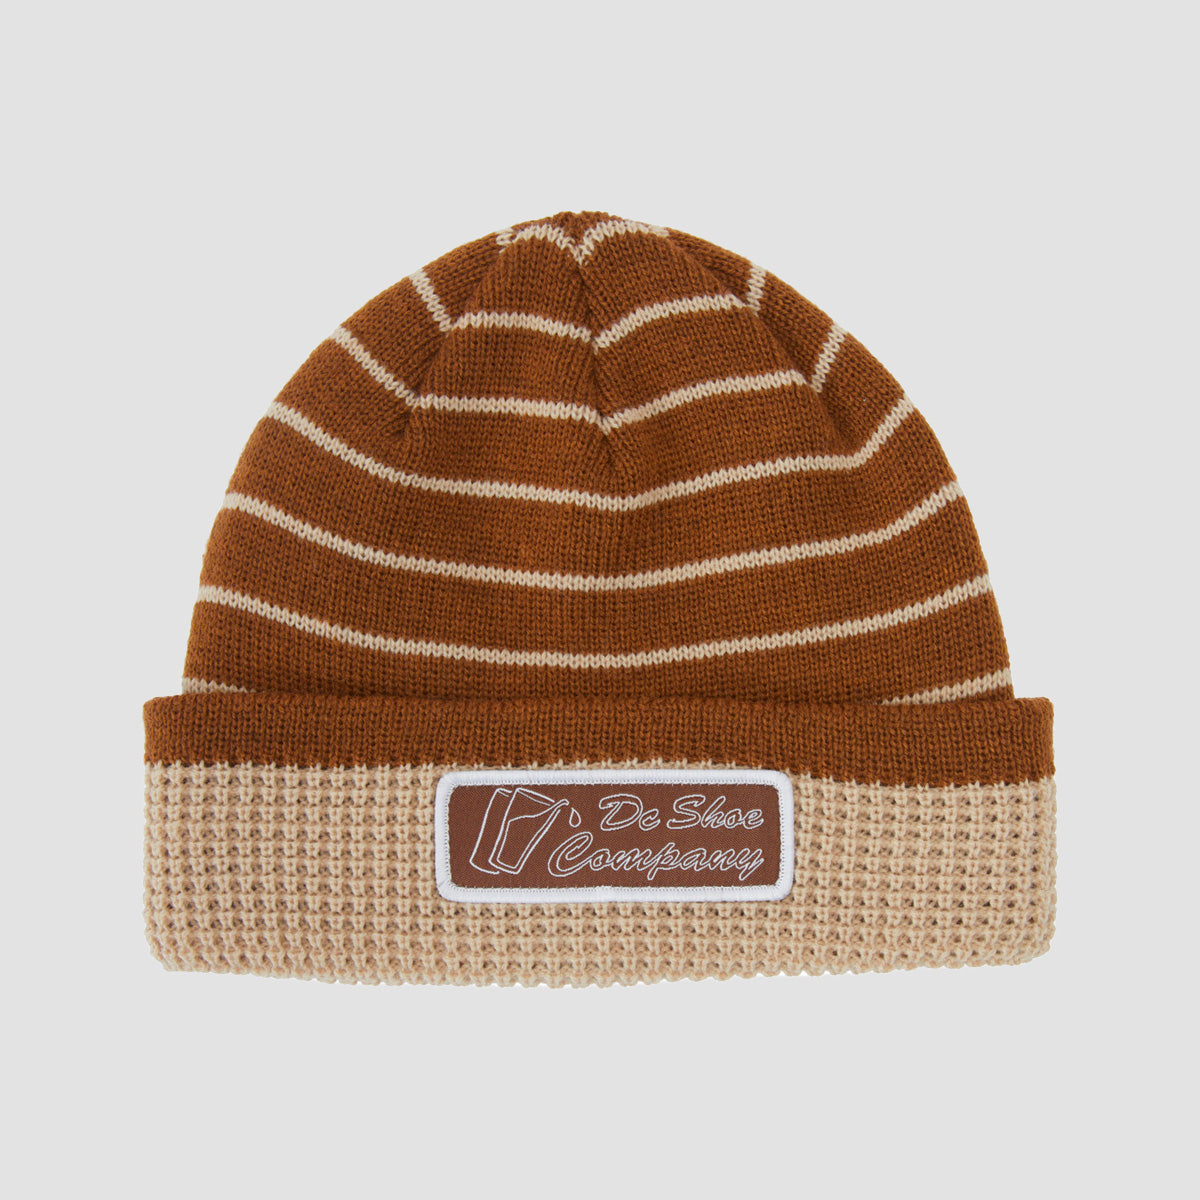 – 3 | Beanies Page Rollersnakes